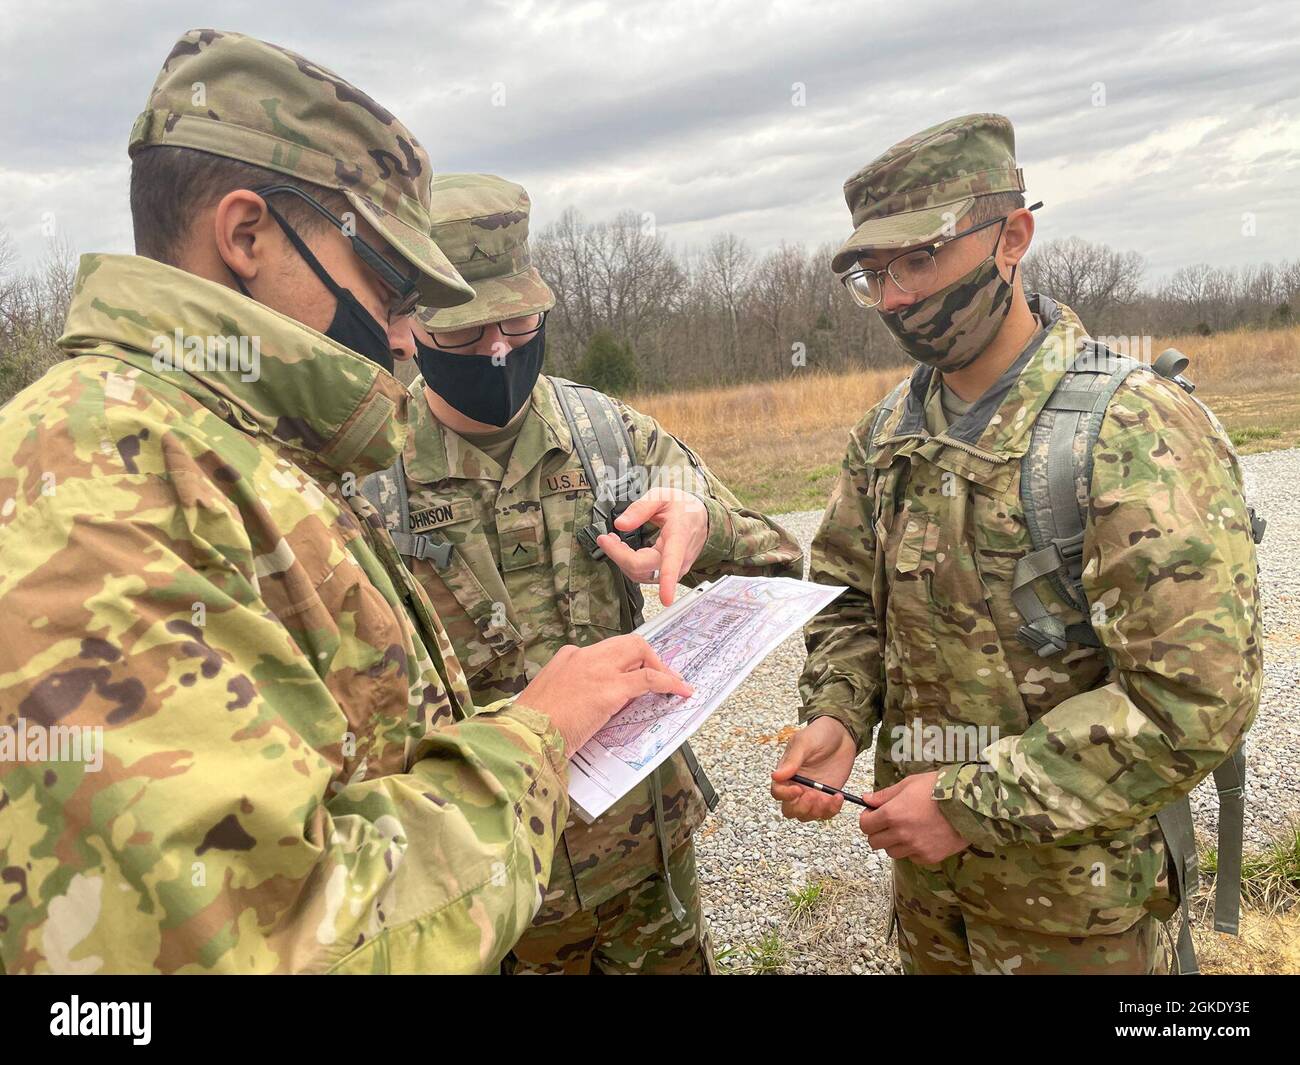 Soldiers of the 1st Theater Sustainment Command plot points on a map during land navigation training at Fort Knox, Kentucky, March 25, 2021. Land navigation requires traversing unfamiliar territory using basic tools such as a compass and a paper map to get from one point to another. Stock Photo